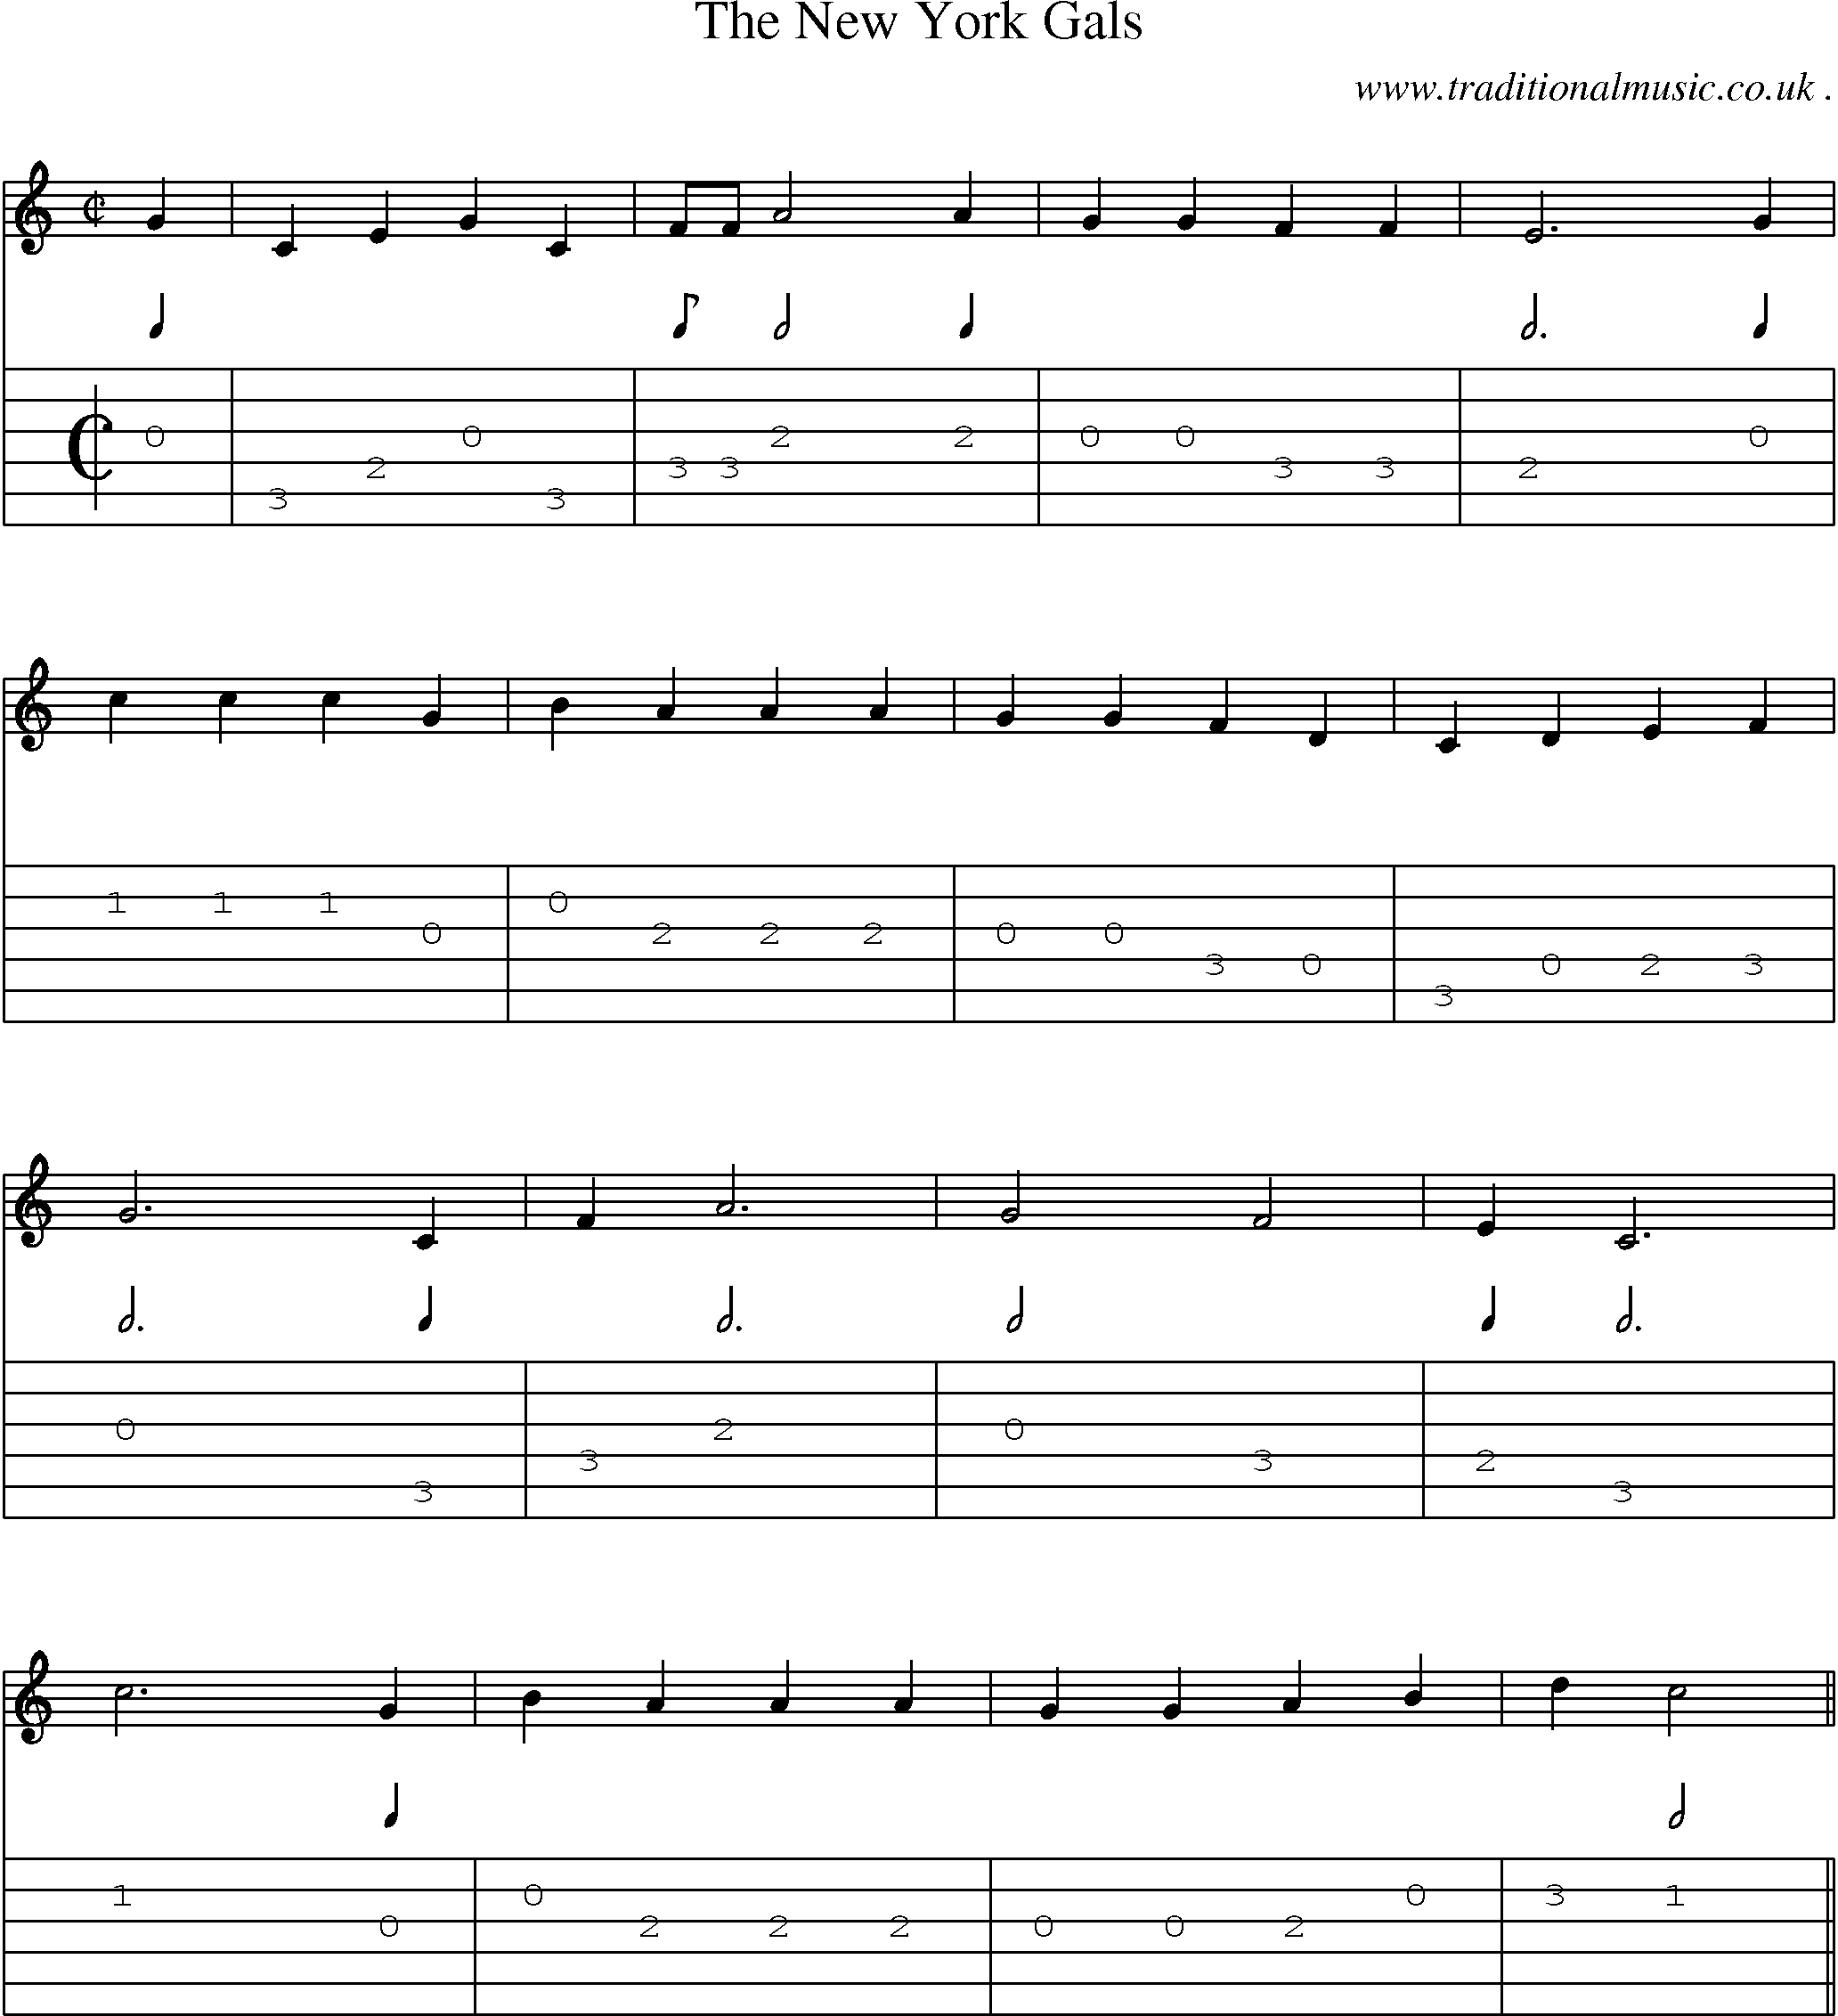 Sheet-Music and Guitar Tabs for The New York Gals